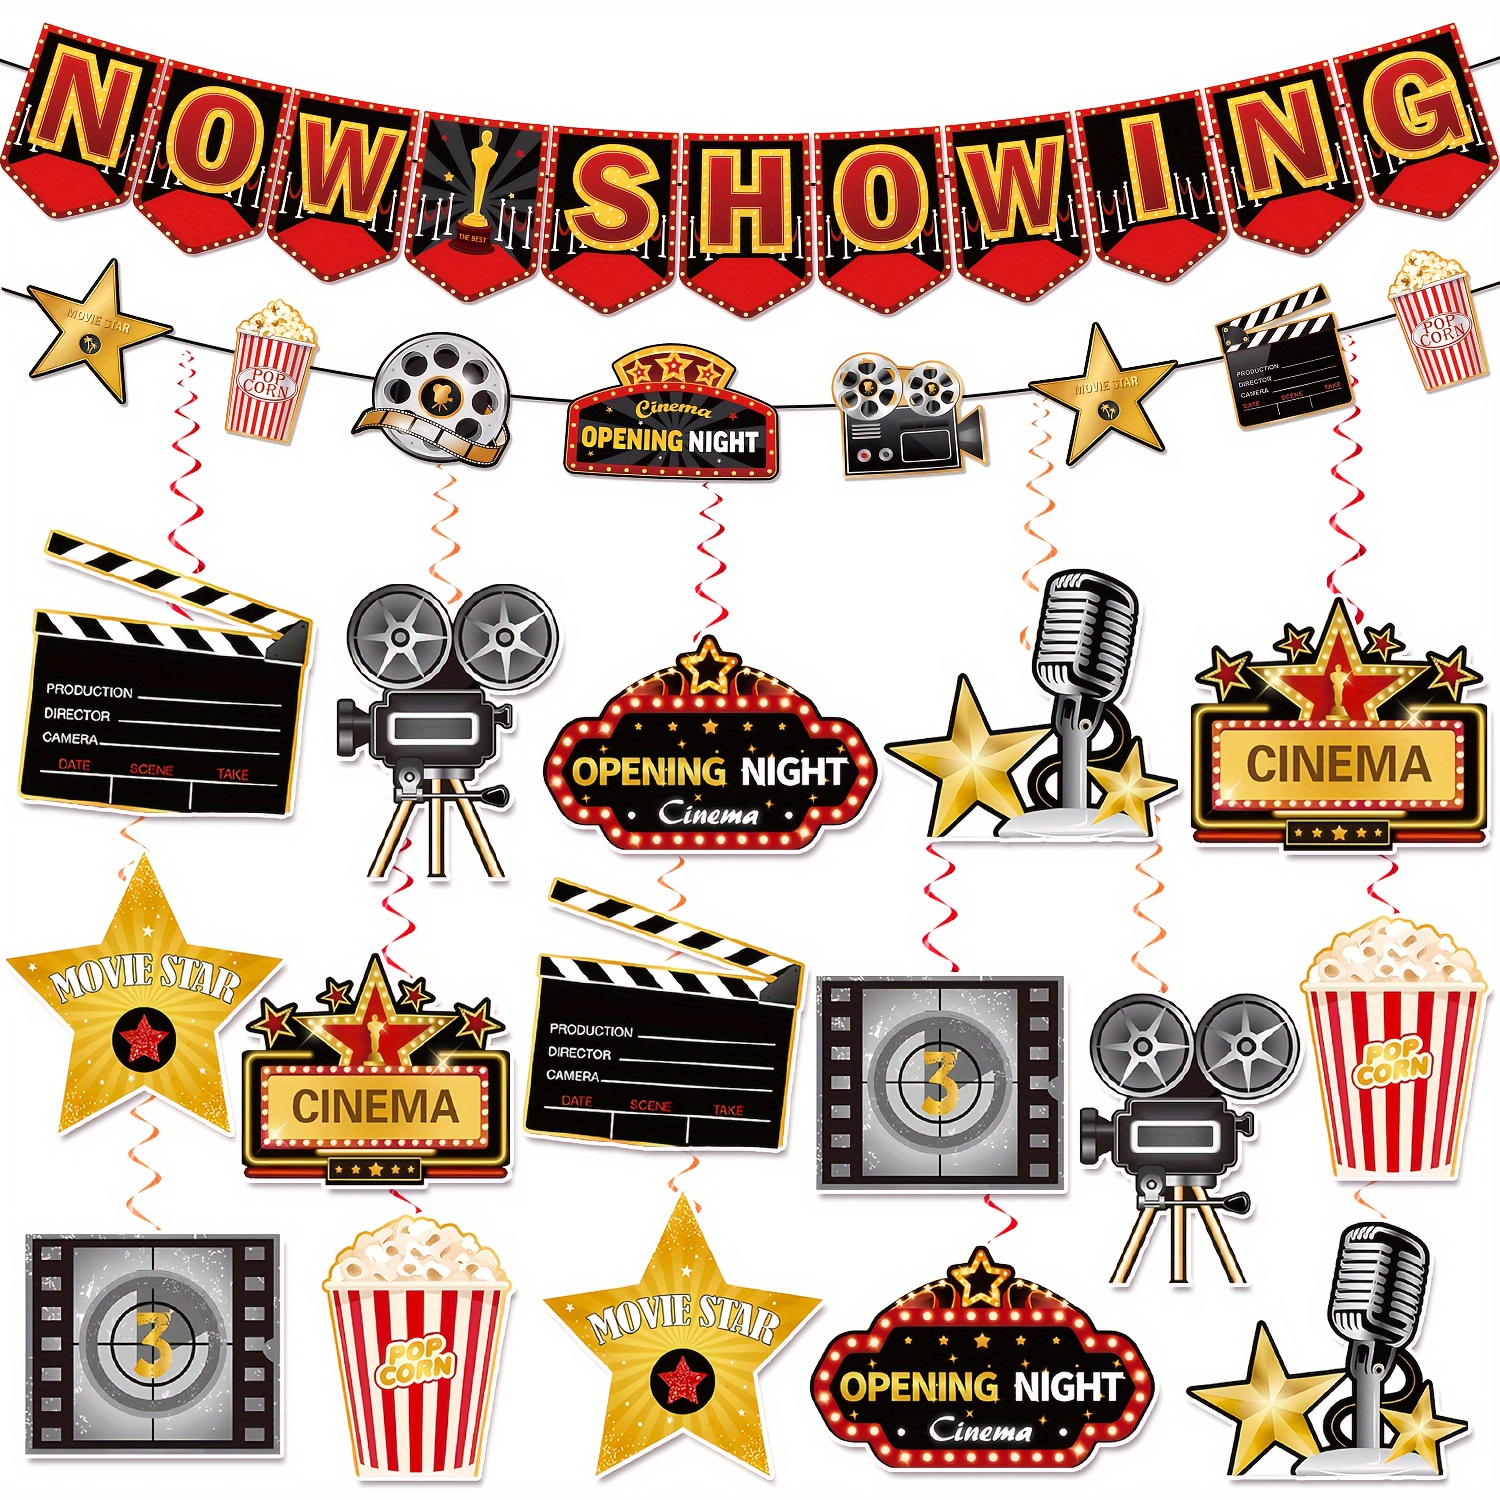 

51 Pcs Movie Night Themed Swirls - Now Showing Banner, Clapperboard, , Popcorn, And More For Wedding, Birthday, Or Any Party Decorations